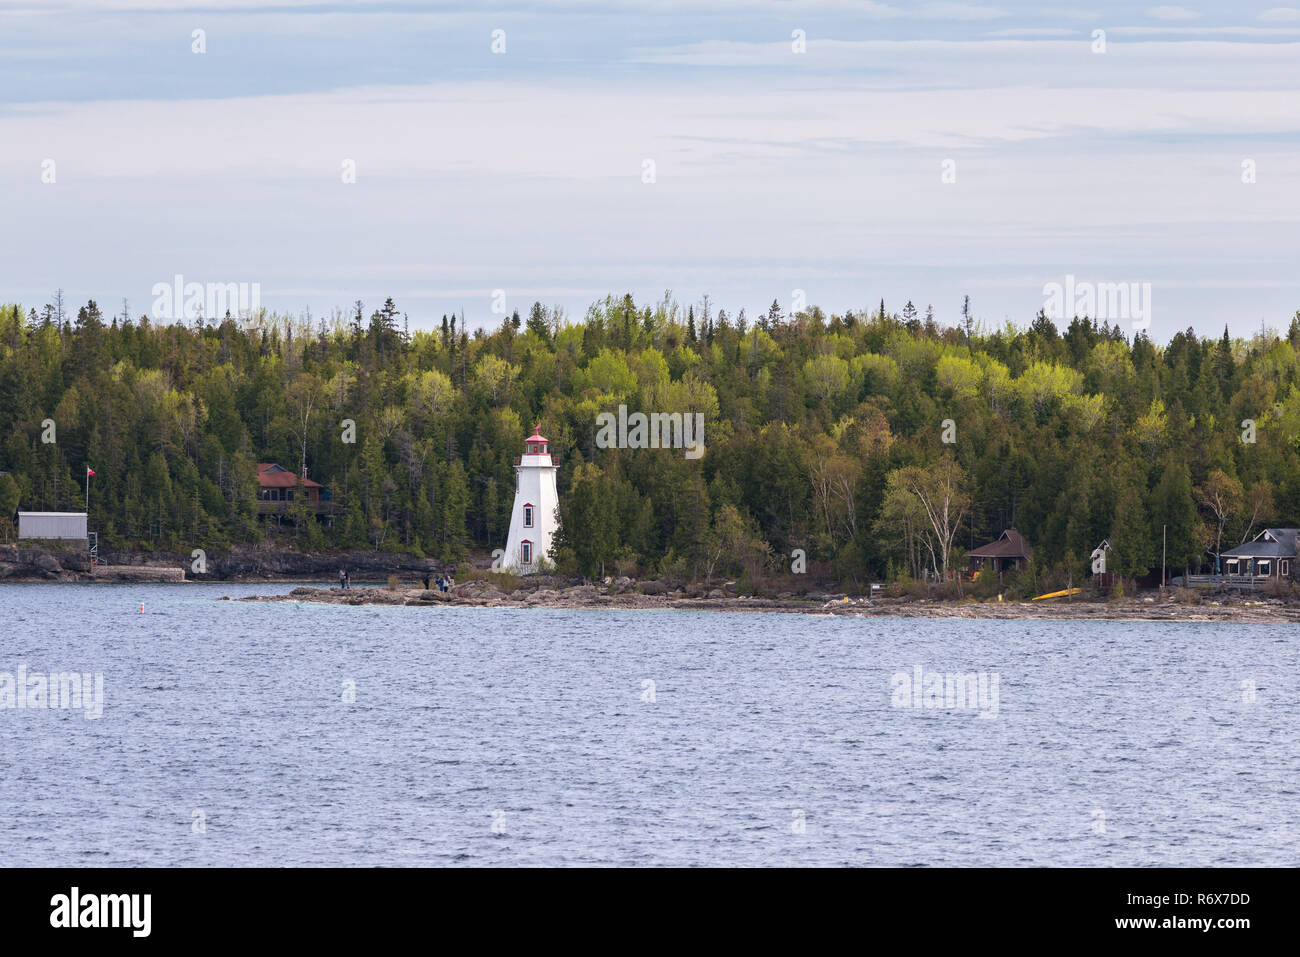 People standing on the rocky coast near Big Tub Lighthouse at the entrance of Big Tub Harbour, Tobermory, Ontario, Canada Stock Photo